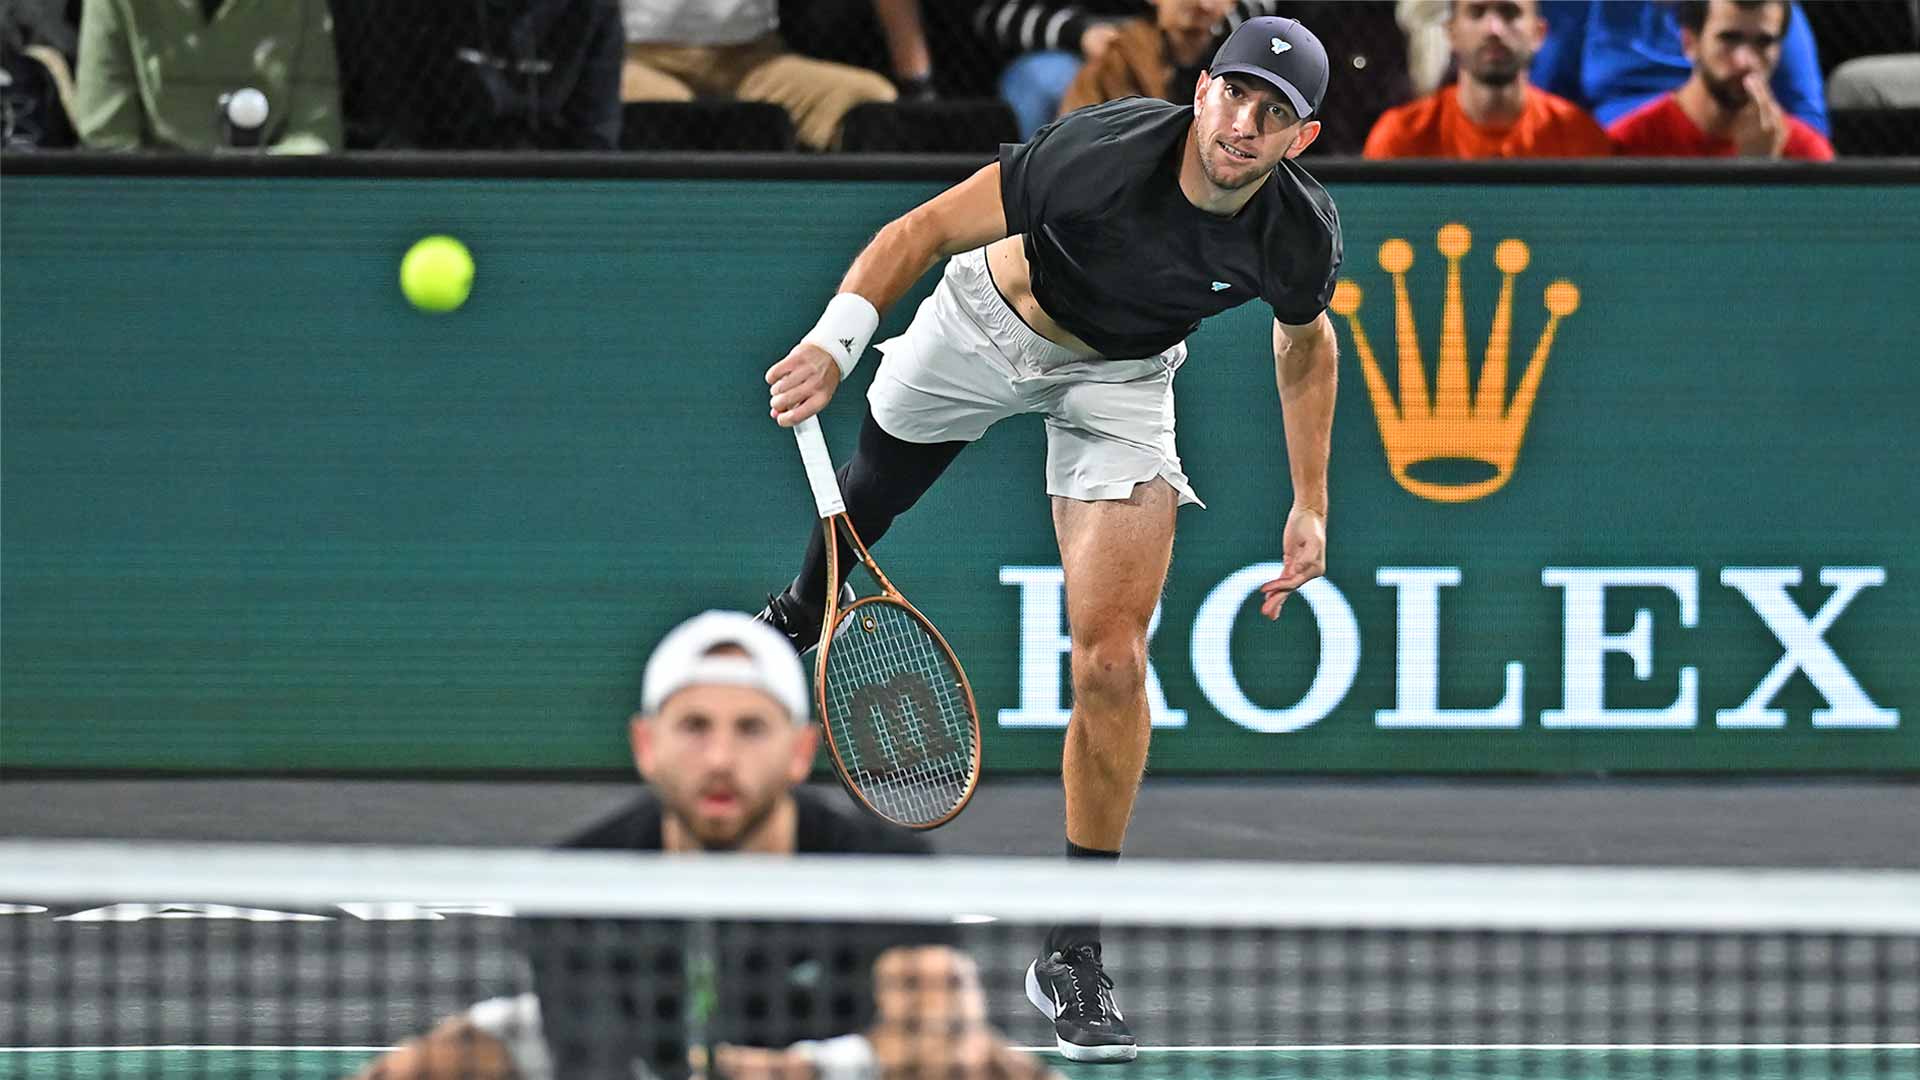 Nathaniel Lammons and Jackson Withrow book a quarter-final spot on Thursday at the Rolex Paris Masters.